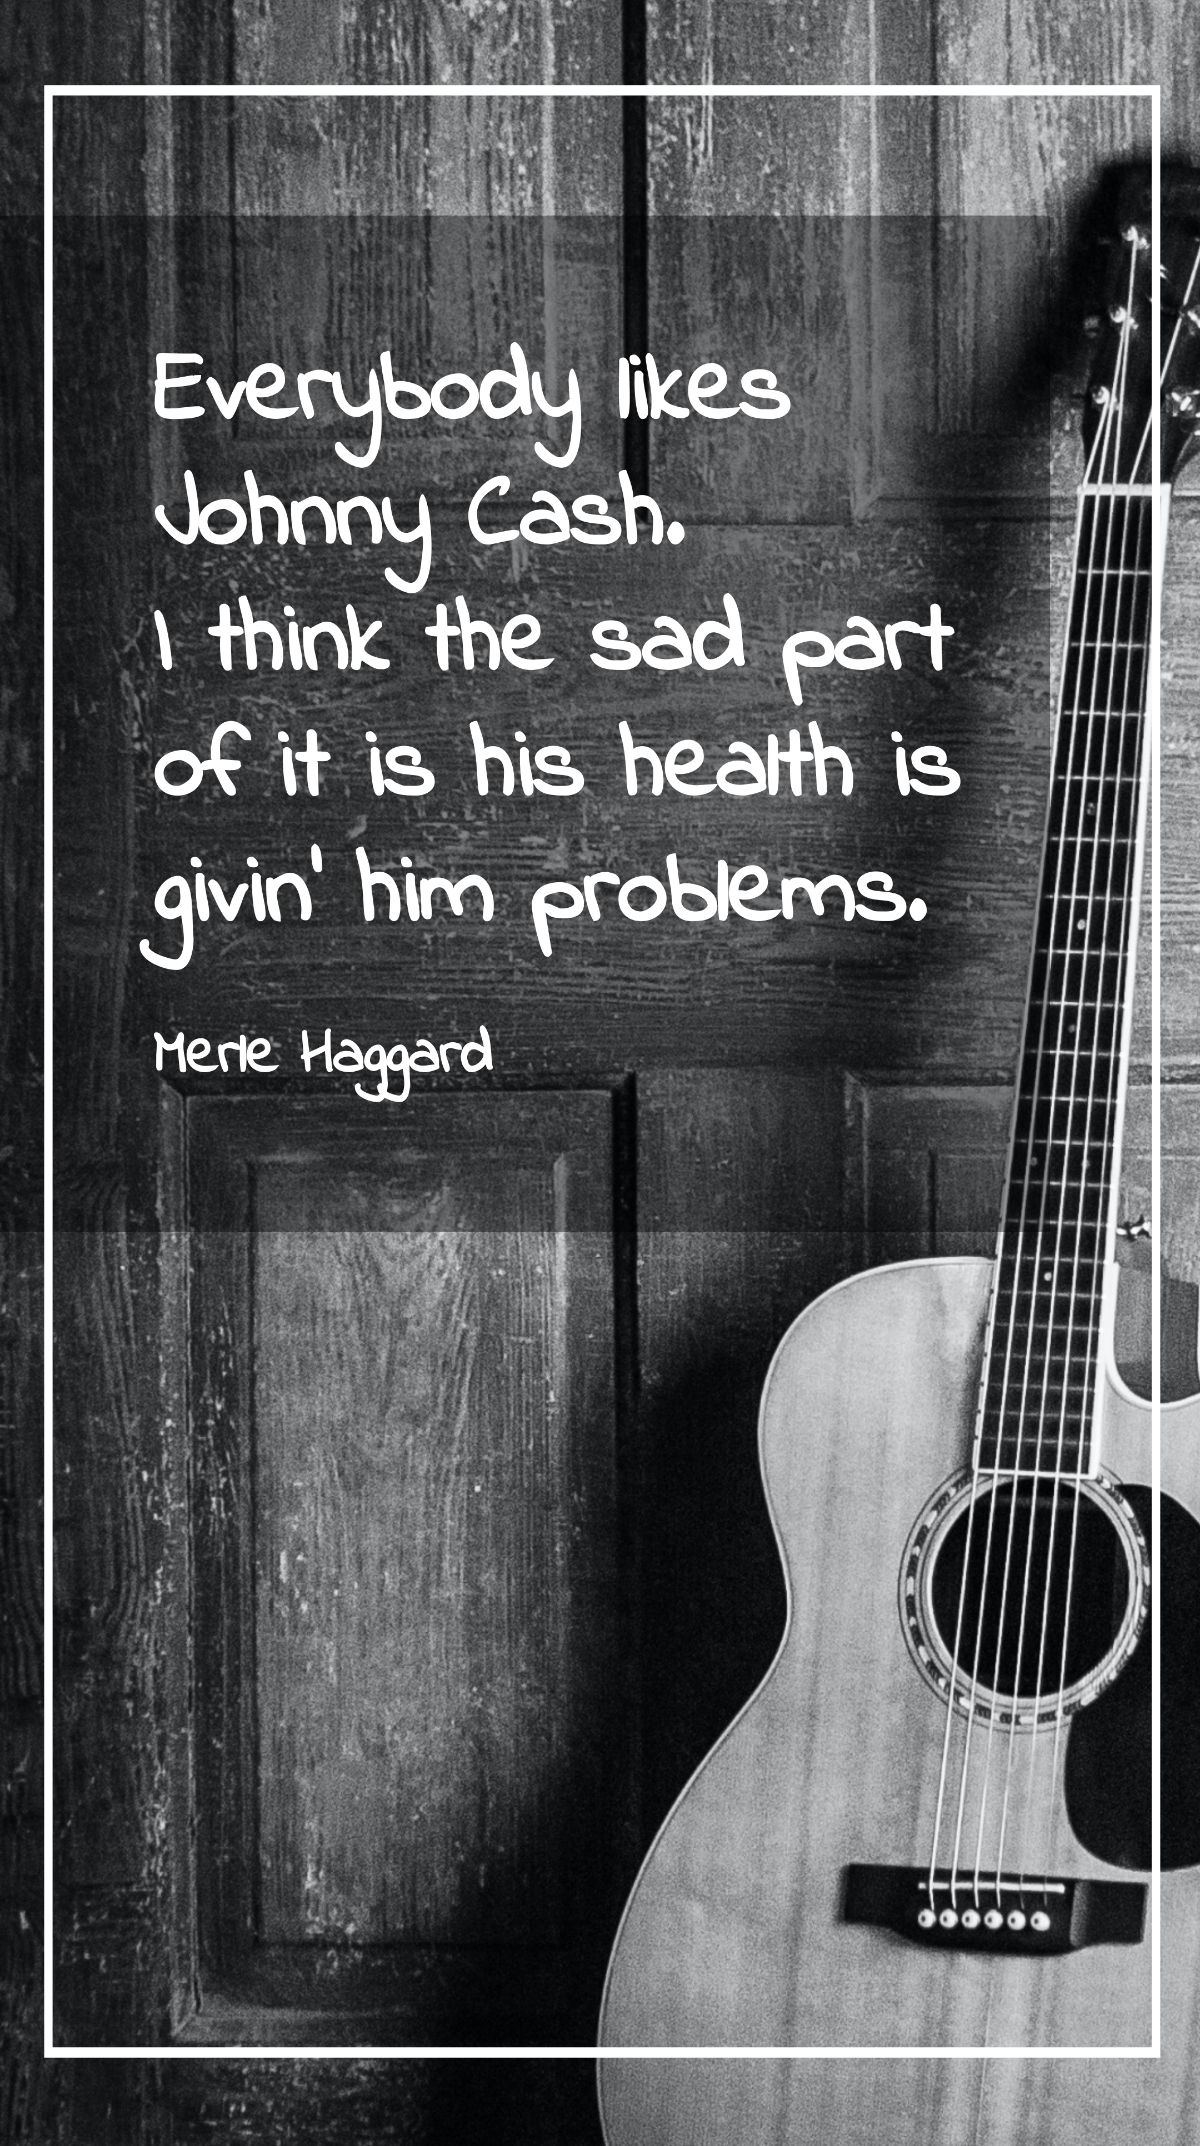 Merle Haggard - Everybody likes Johnny Cash. I think the sad part of it is his health is givin' him problems. Template